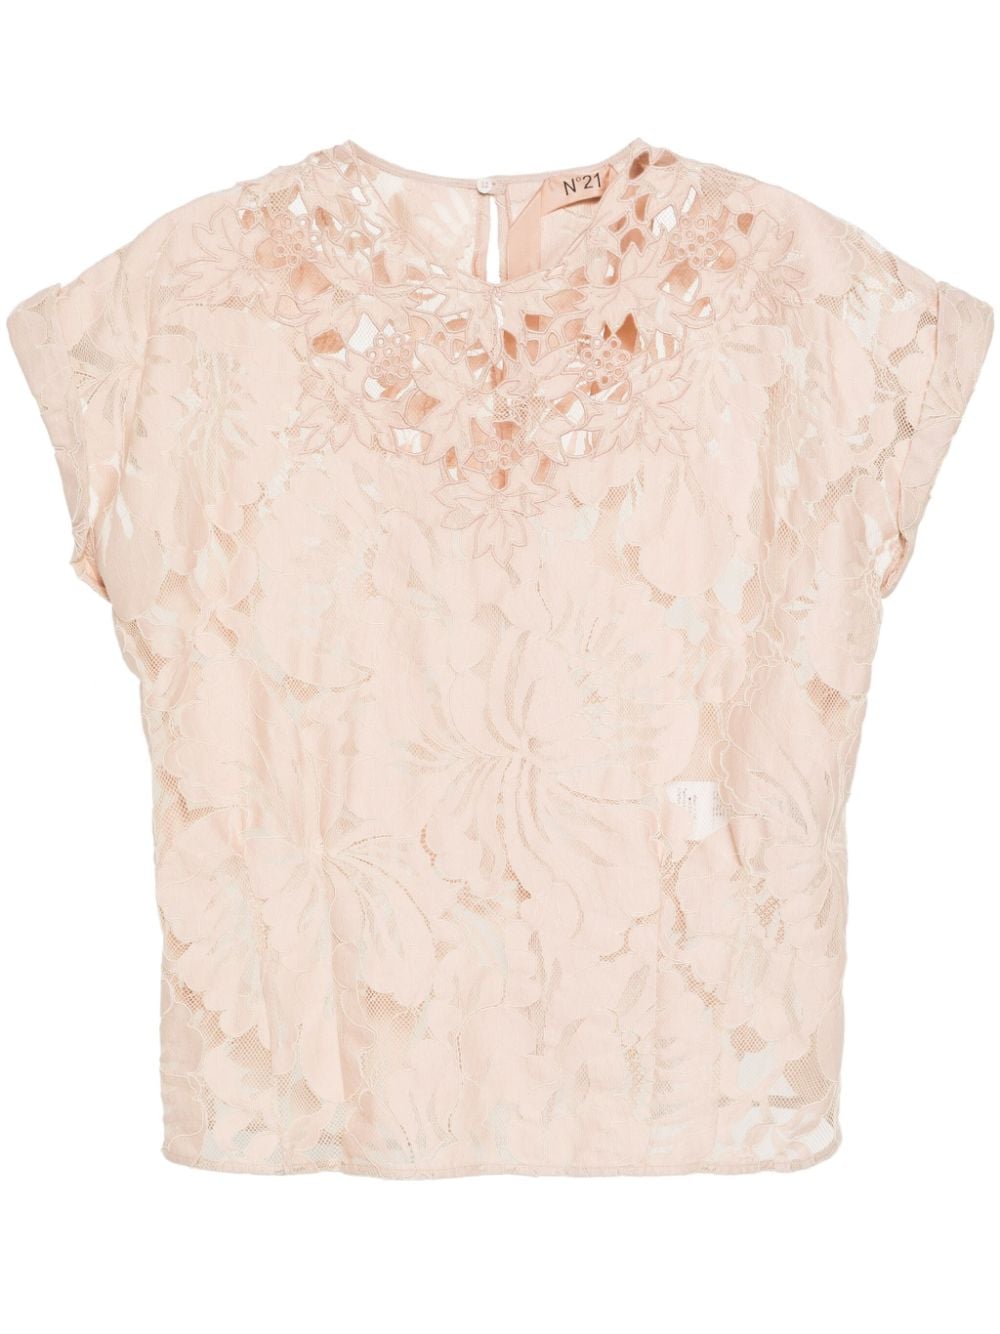 Image 1 of Nº21 corded-lace T-shirt